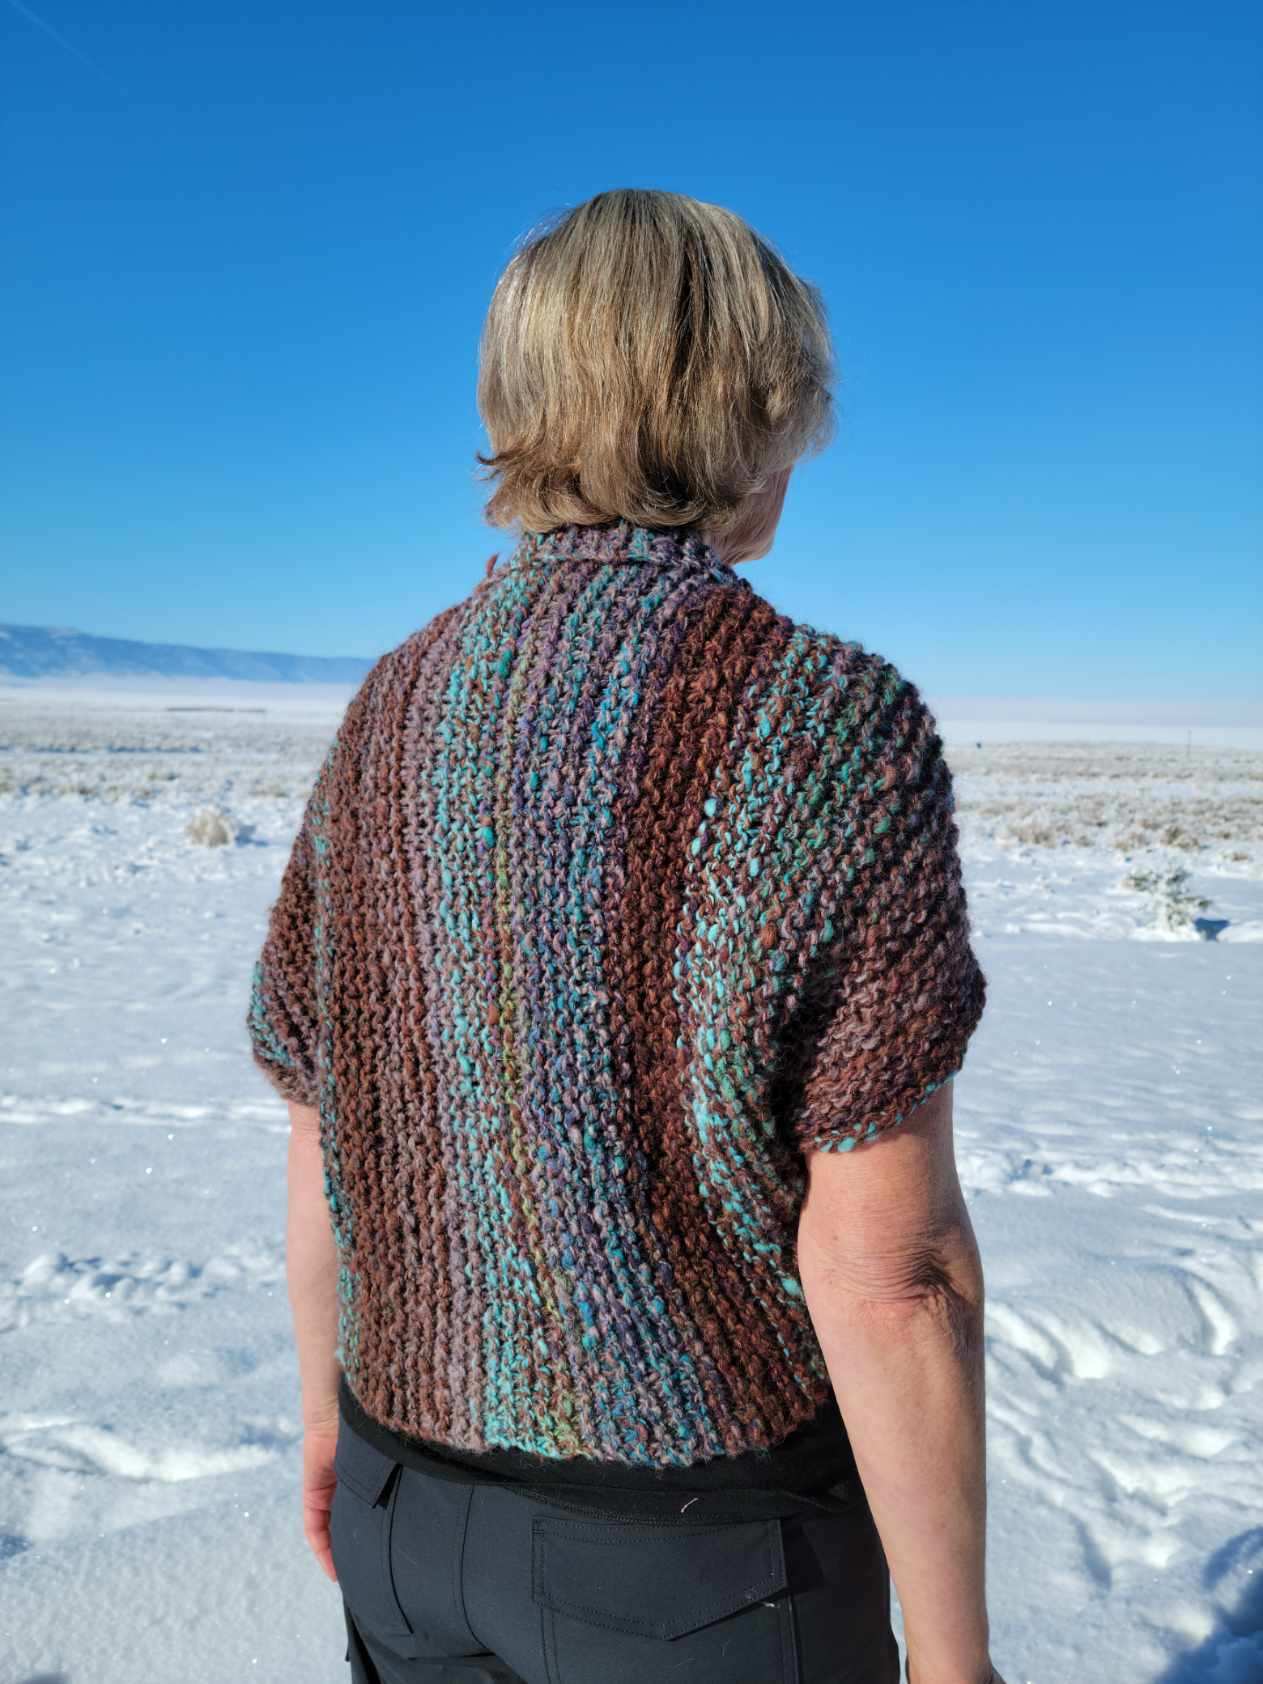 Wild and Wooly Shrug Knitting Pattern